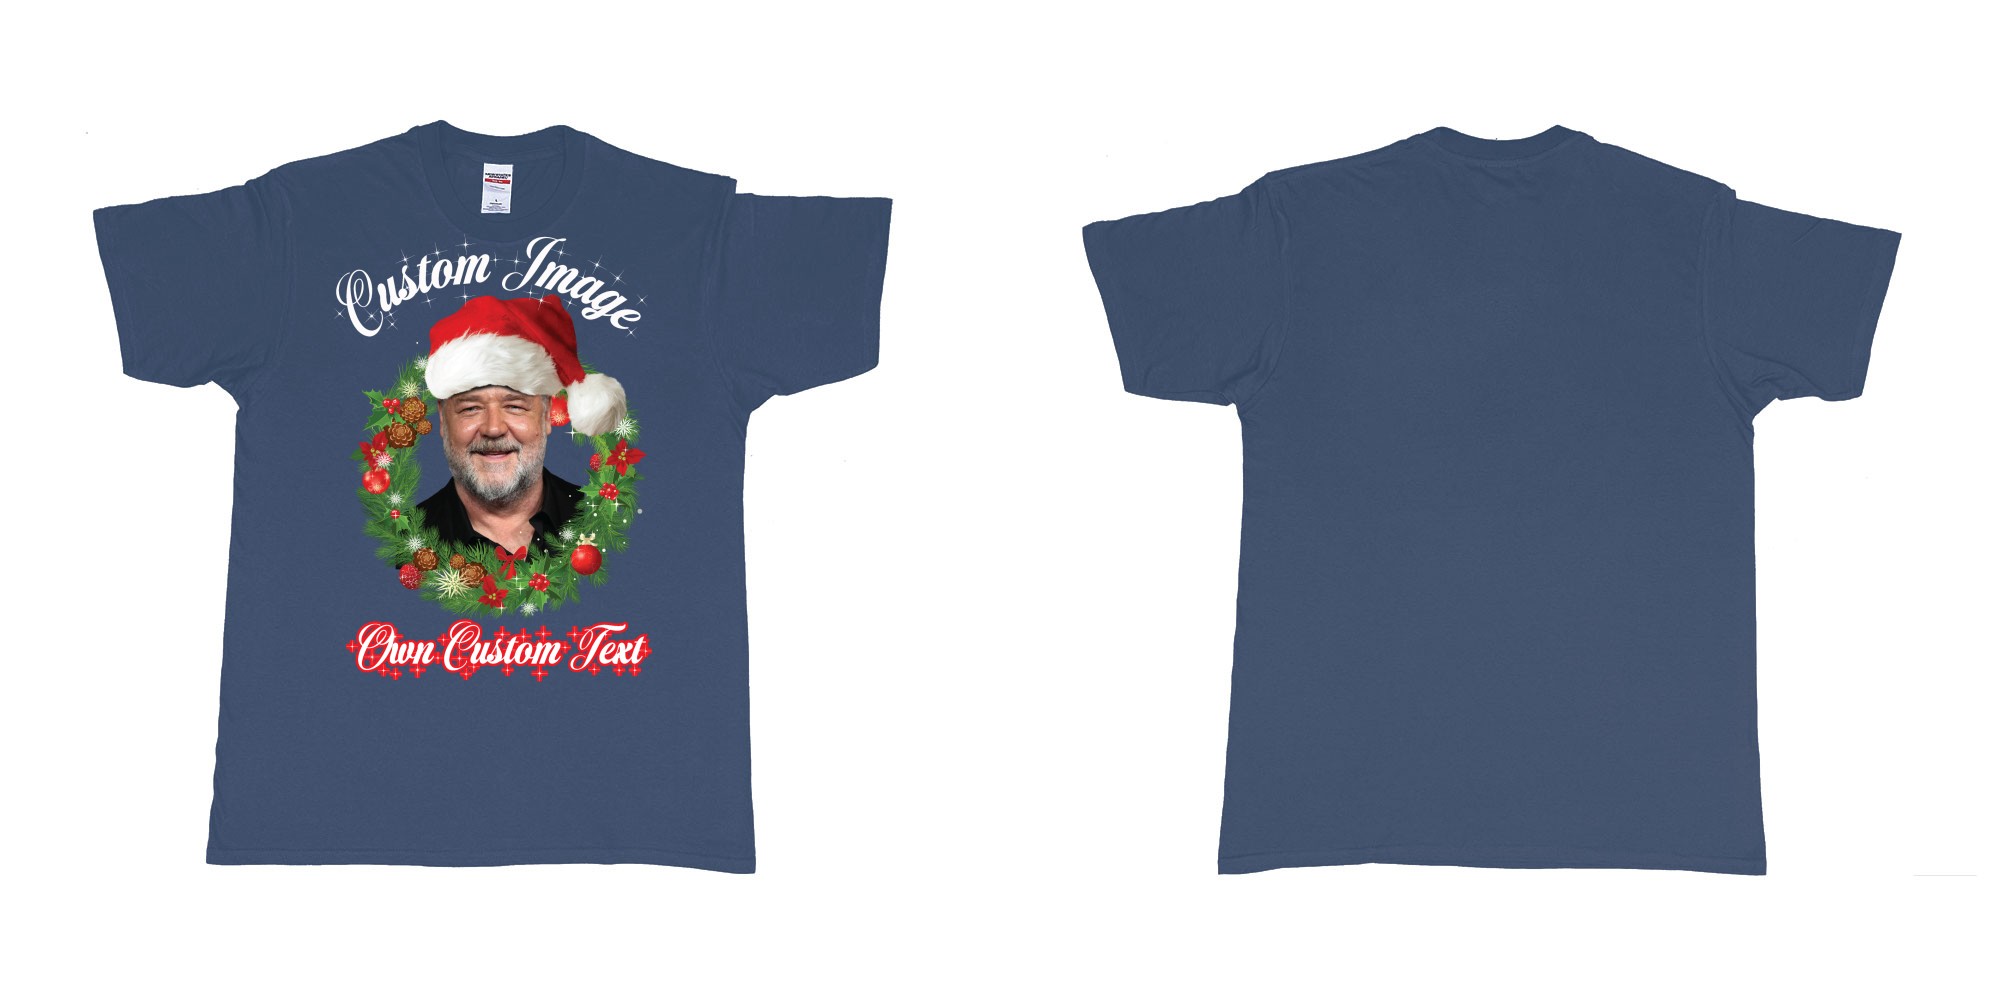 Custom tshirt design christmas wreath custom face image text in fabric color navy choice your own text made in Bali by The Pirate Way